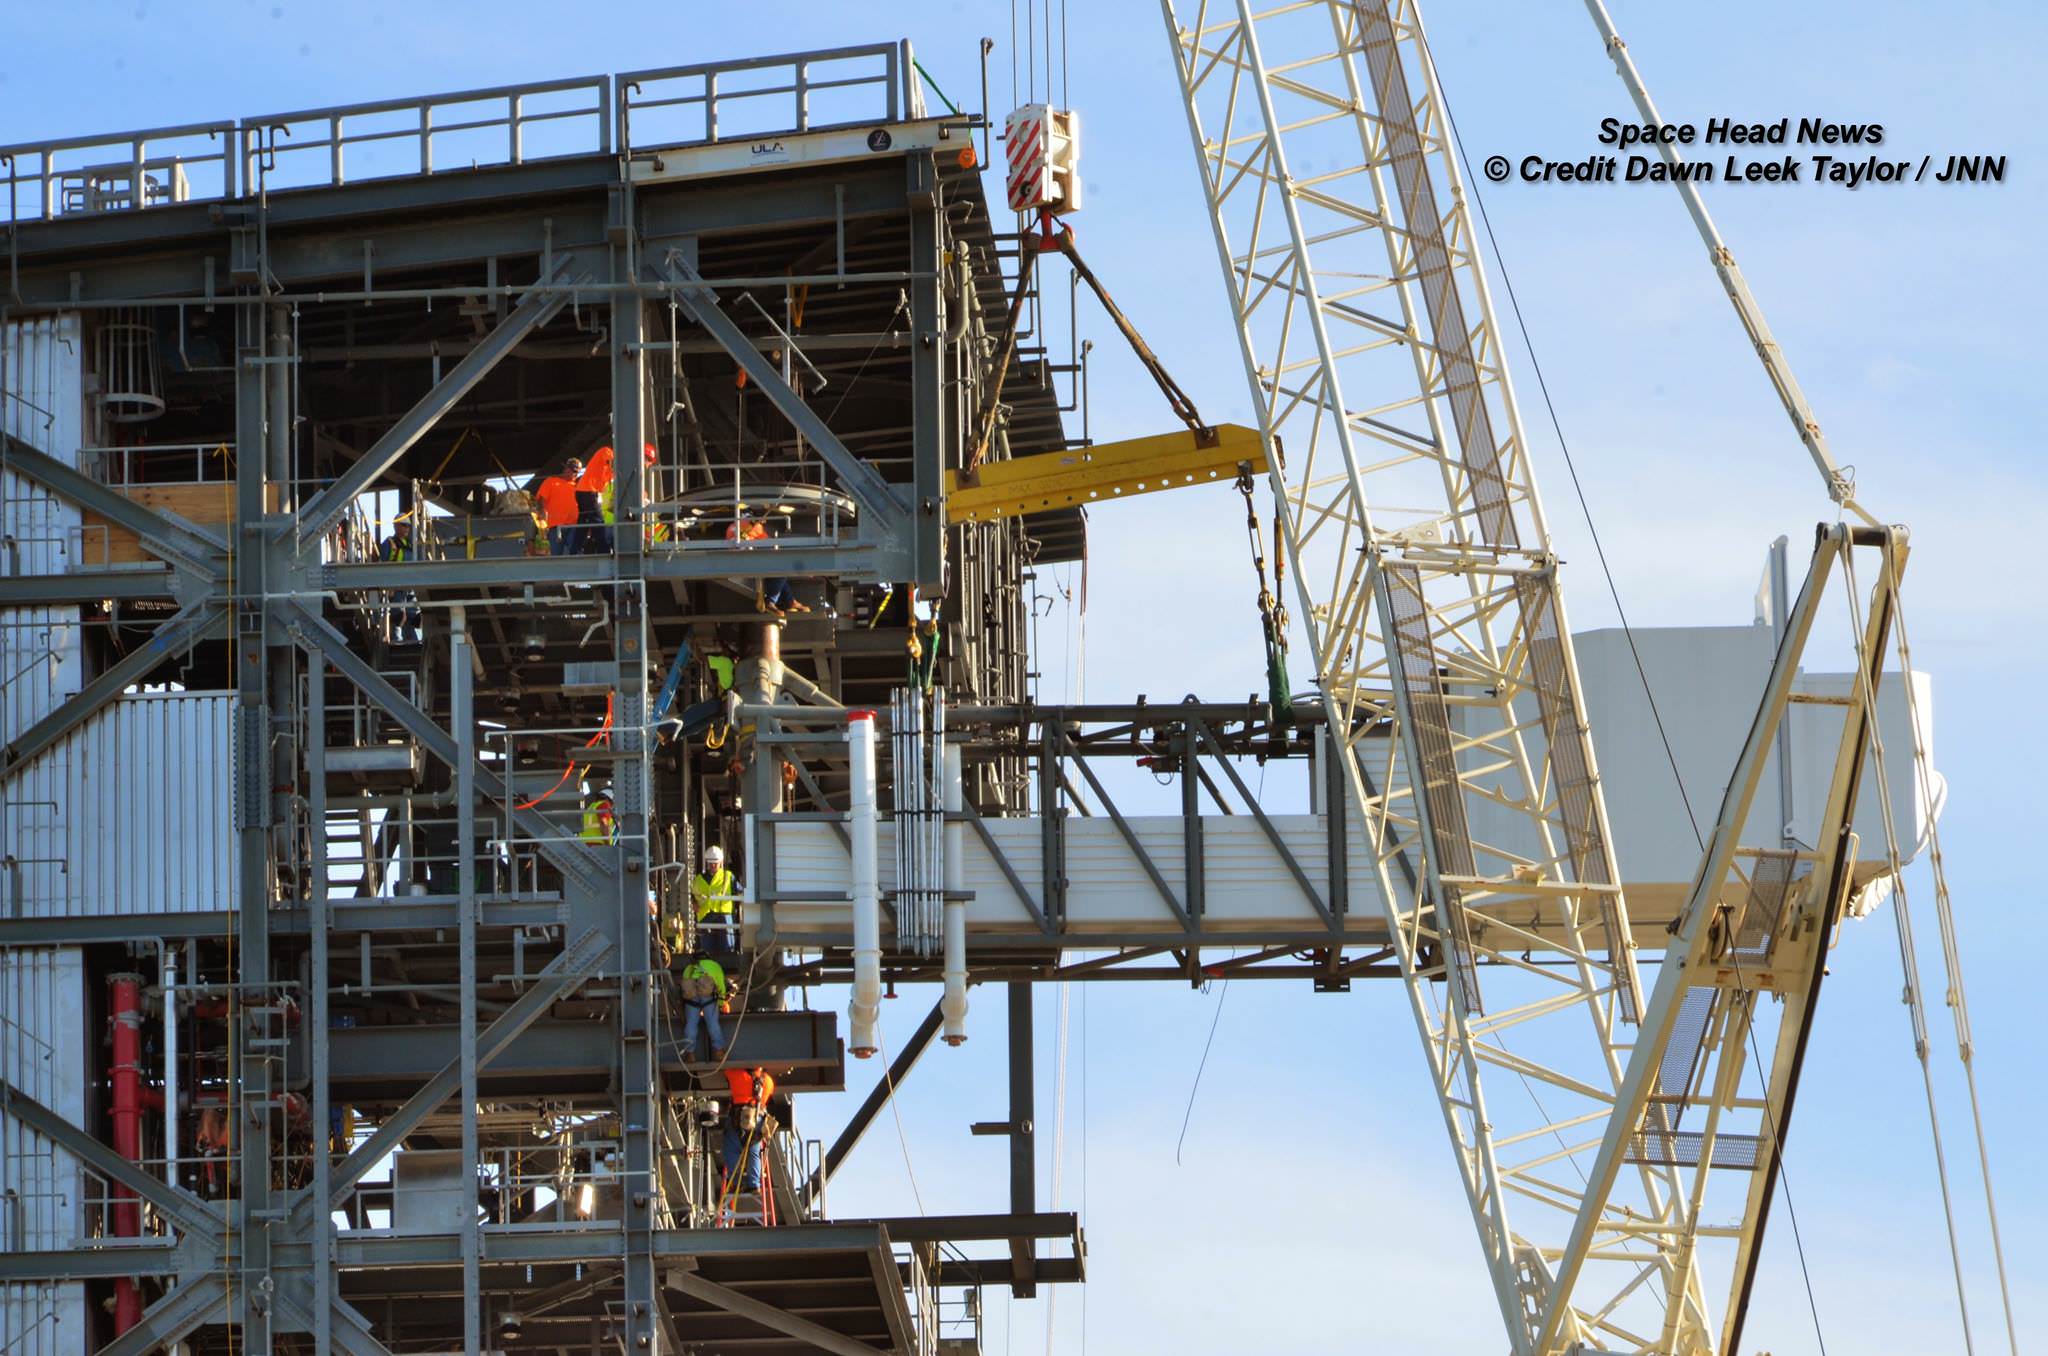 Up close view of Boeing Starliner Crew Access Arm and White Room craned into place at Crew Access Tower at Cape Canaveral Air Force Station’s Space Launch Complex 41 on Aug. 15, 2016.   Credit: Dawn Leek Taylor